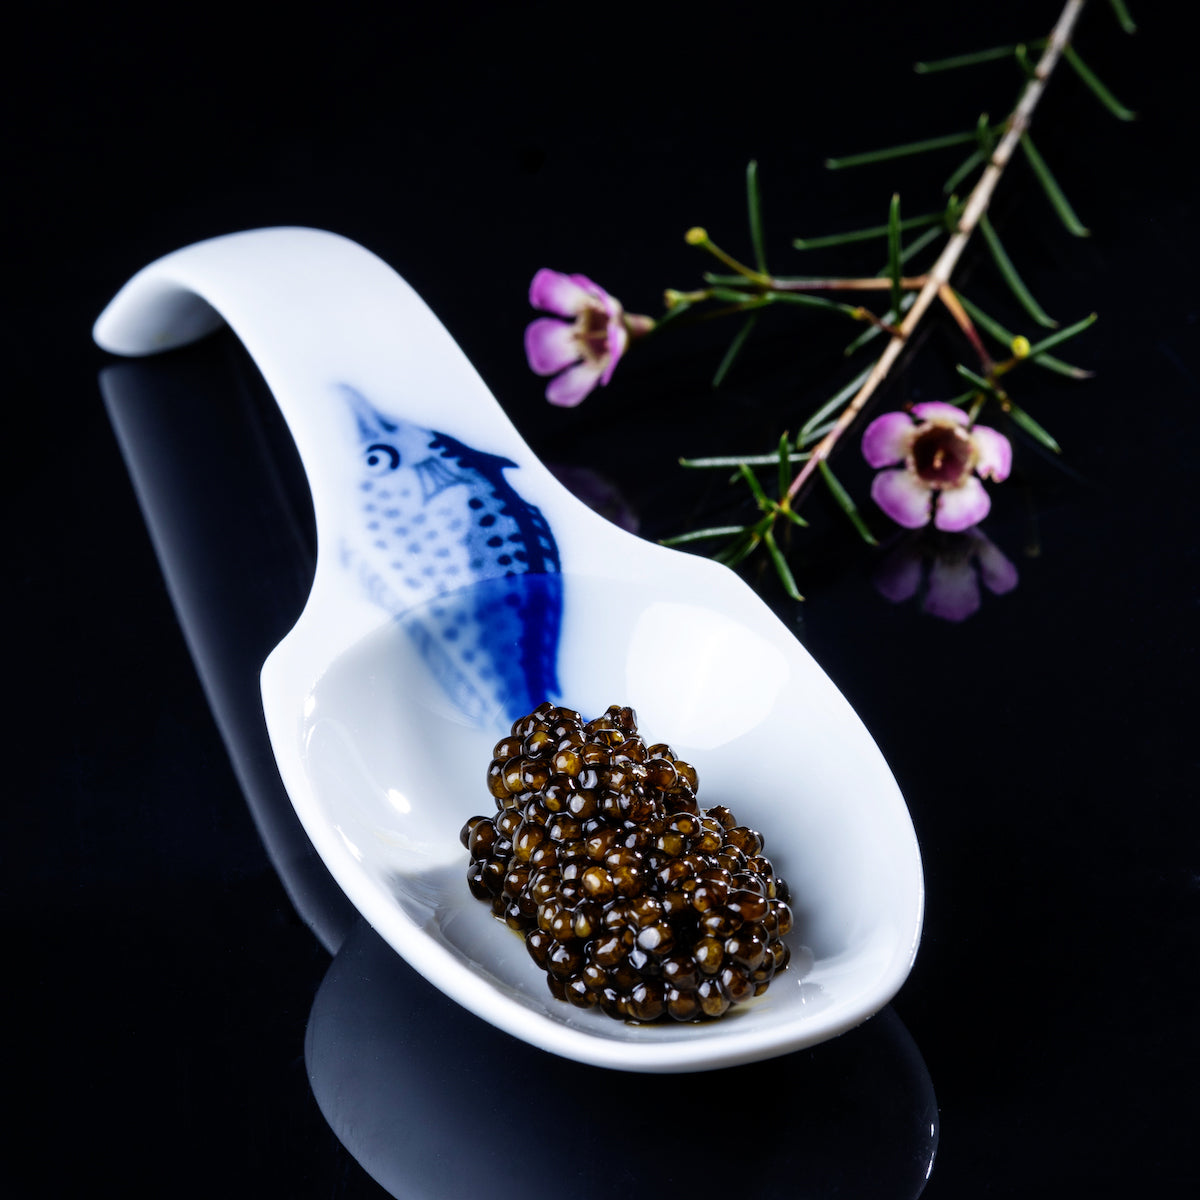 Caviar extraction: in detail